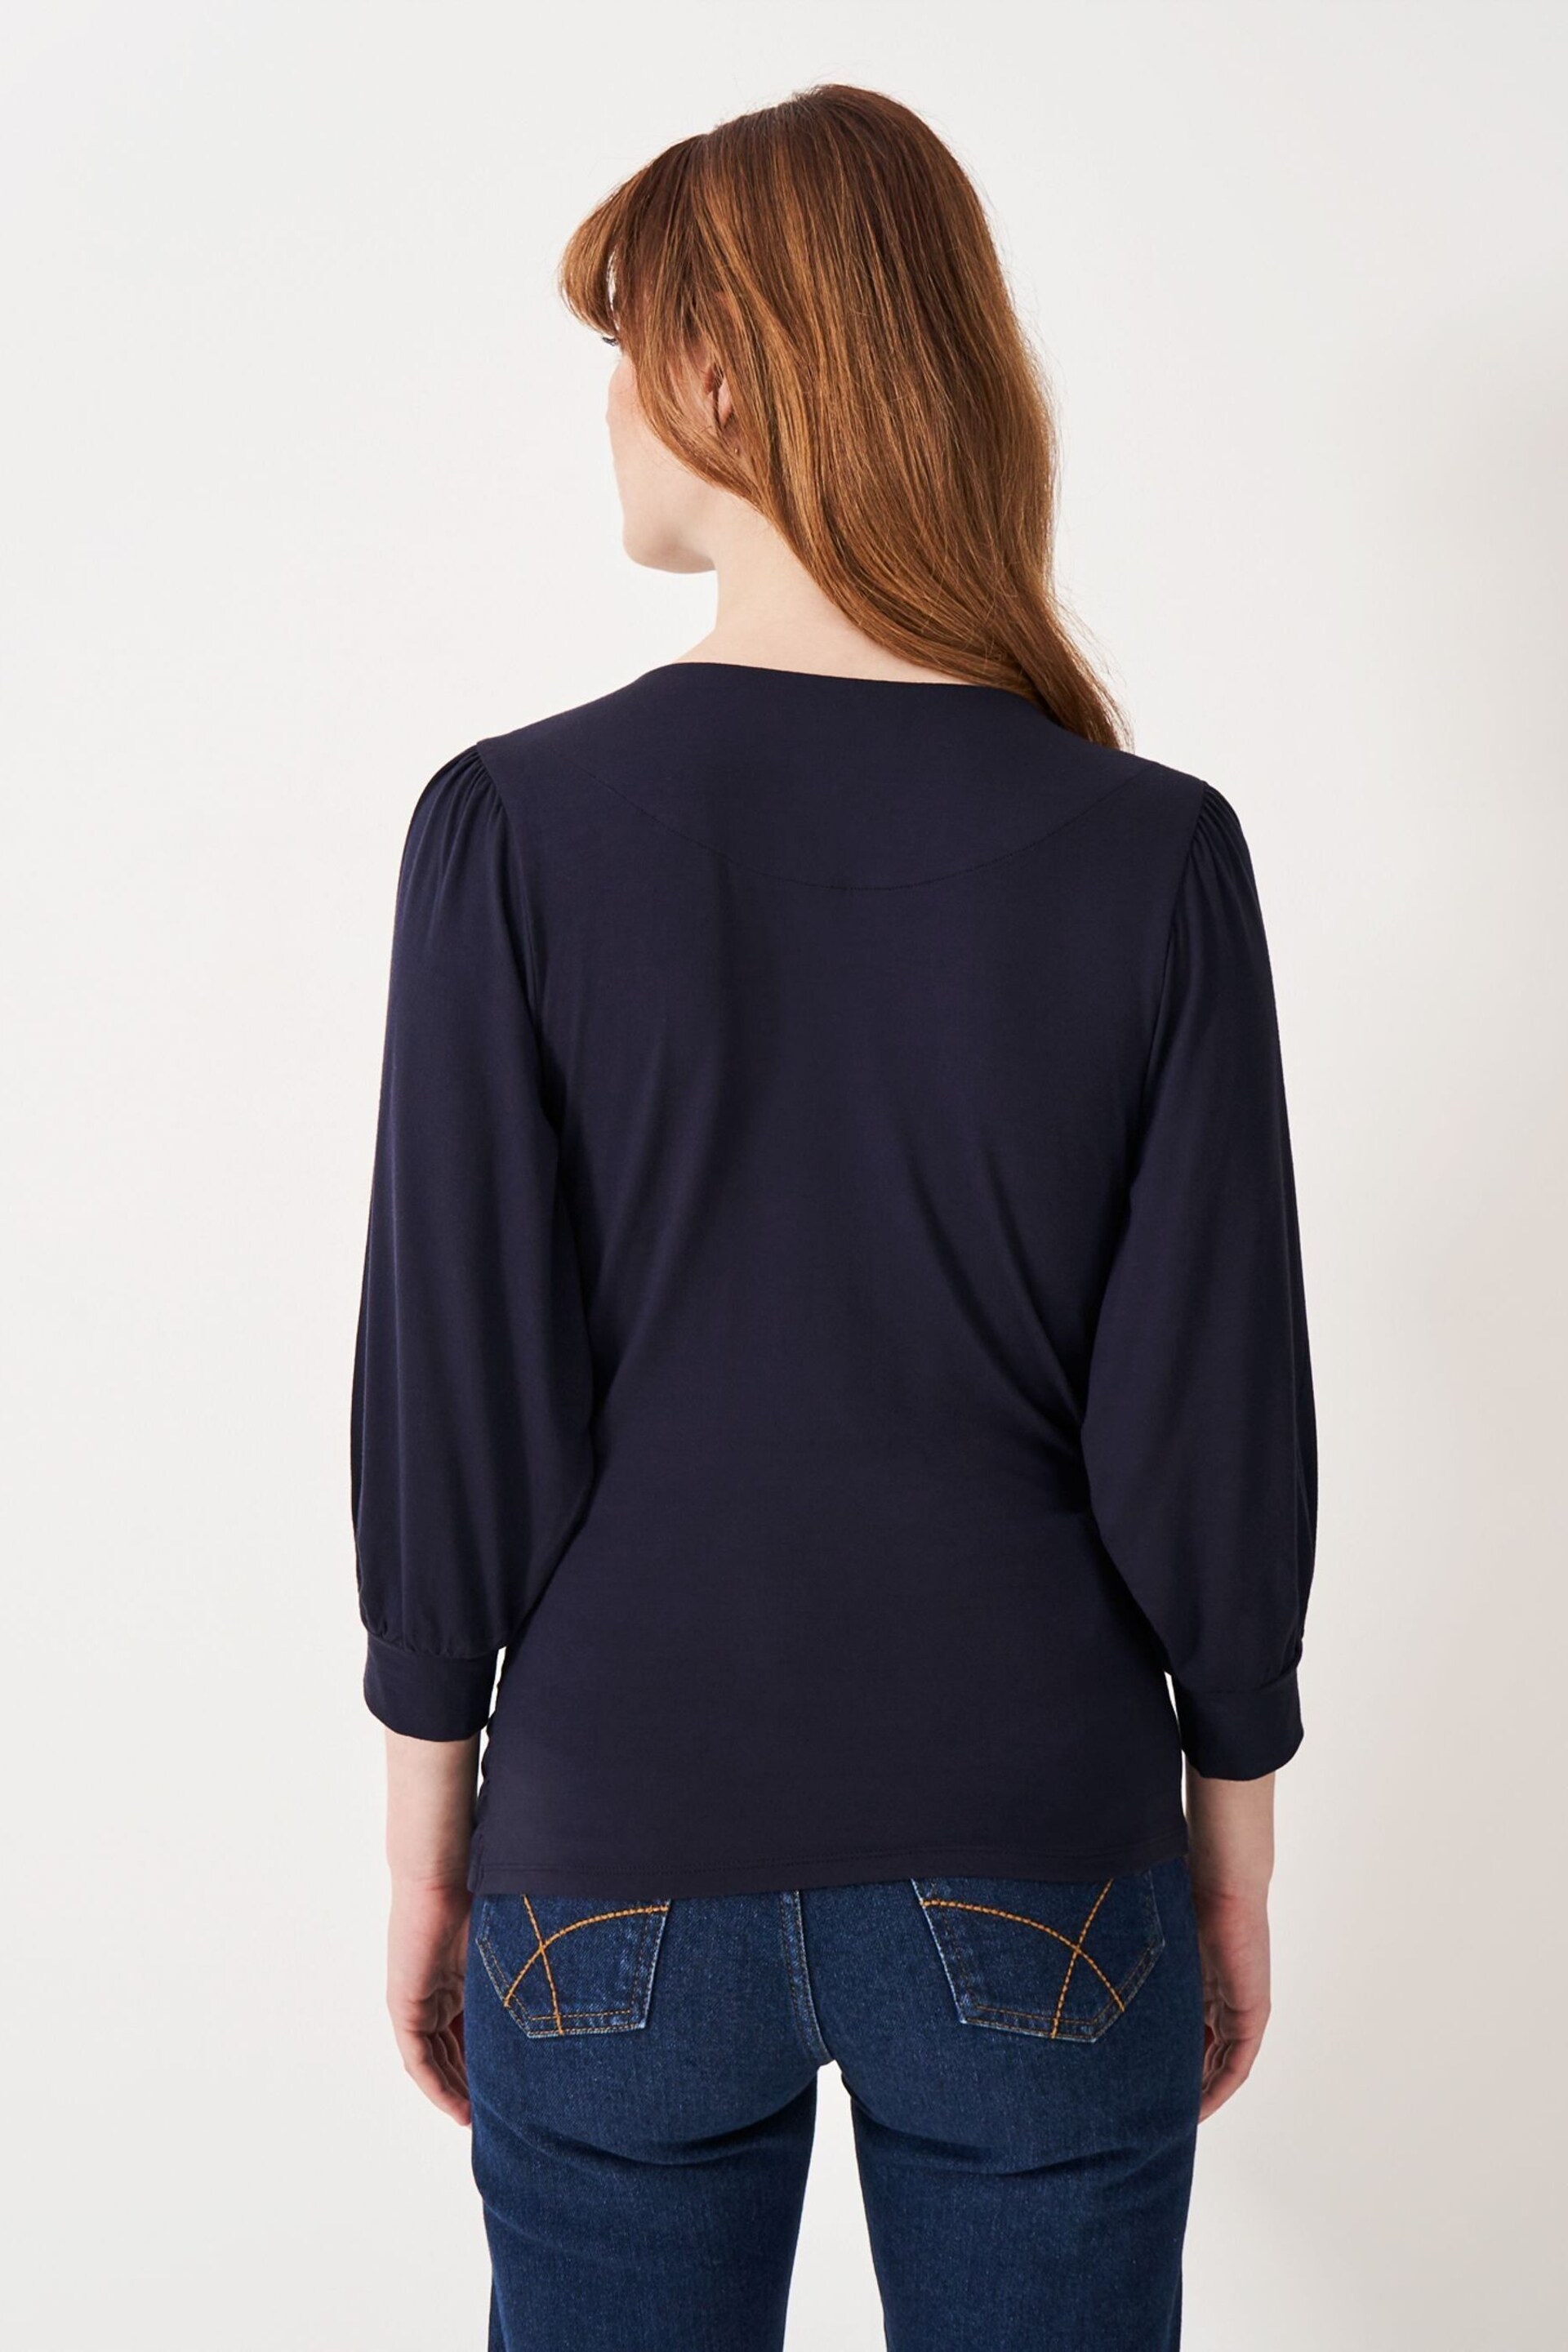 Crew Clothing 3/4 Sleeve Wrap Top - Image 2 of 5